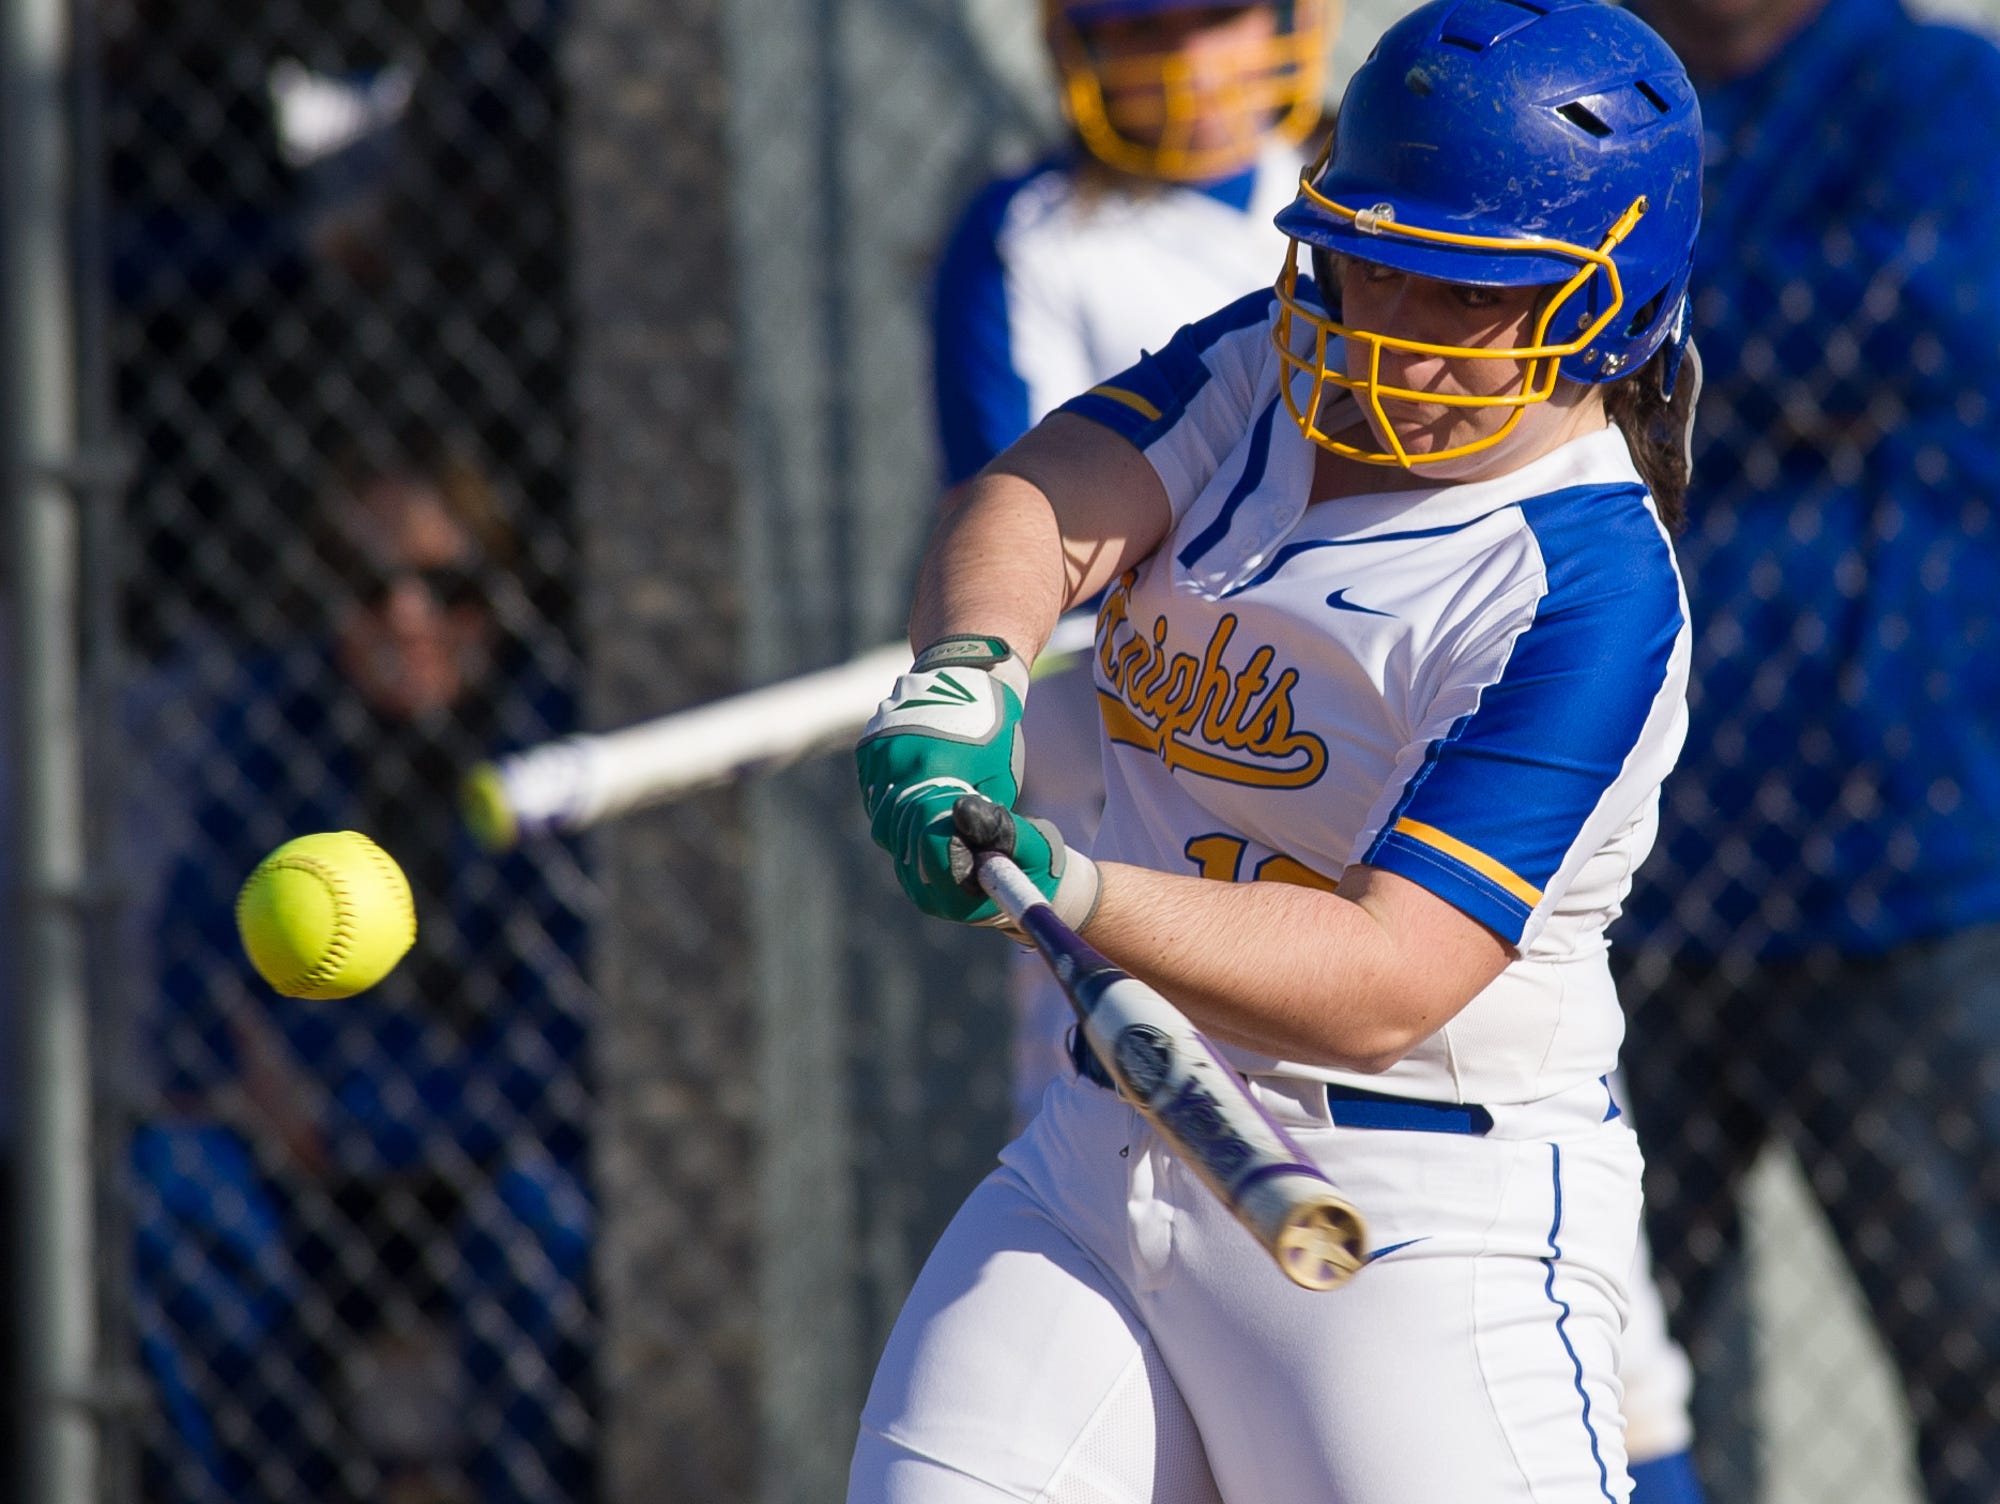 Sussex Central's Taylor Evick (12) takes a swing at a pitch in their game against Sussex Tech.